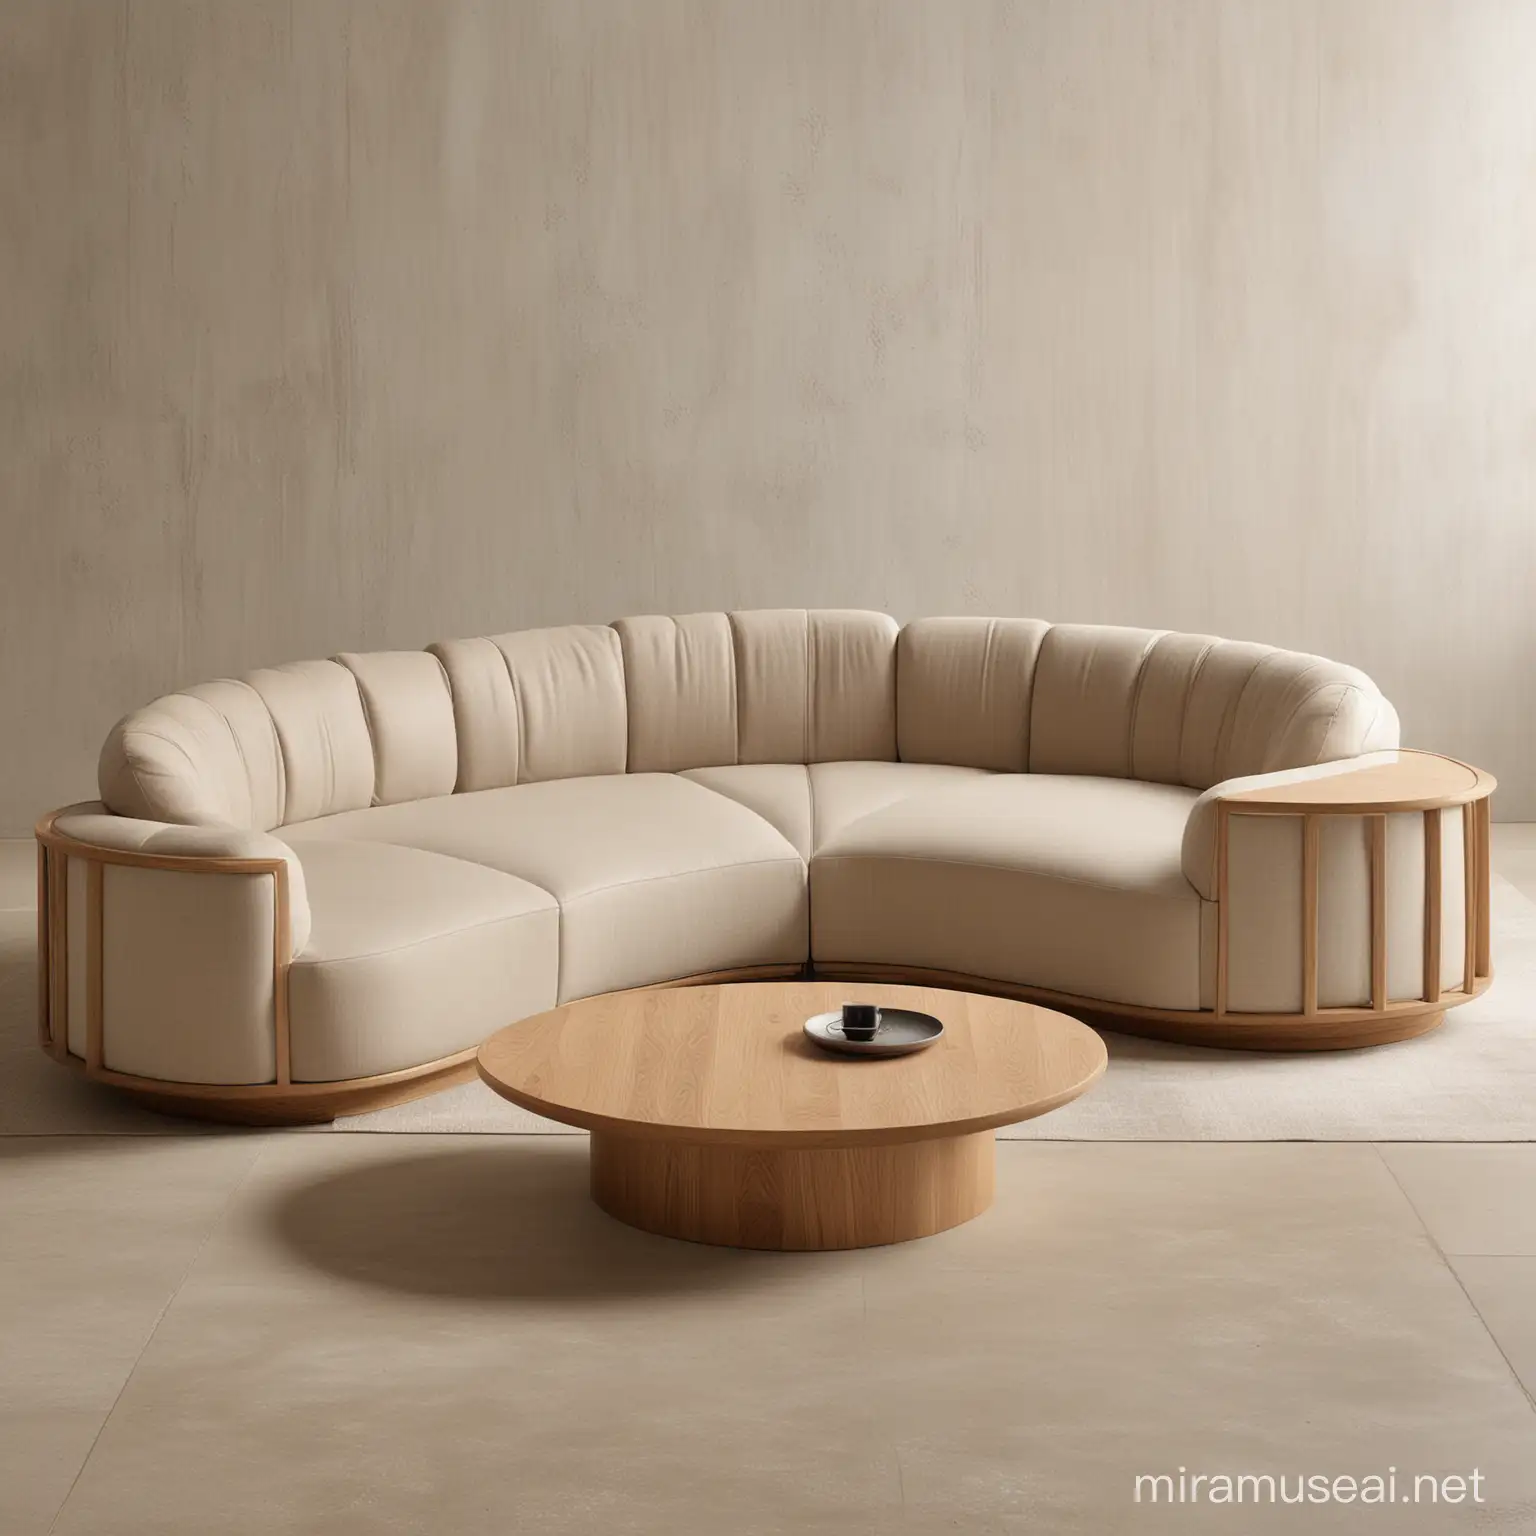 Modern LowBacked Seating Group with Geometric Lines in Textured Oak and Linen Fabric